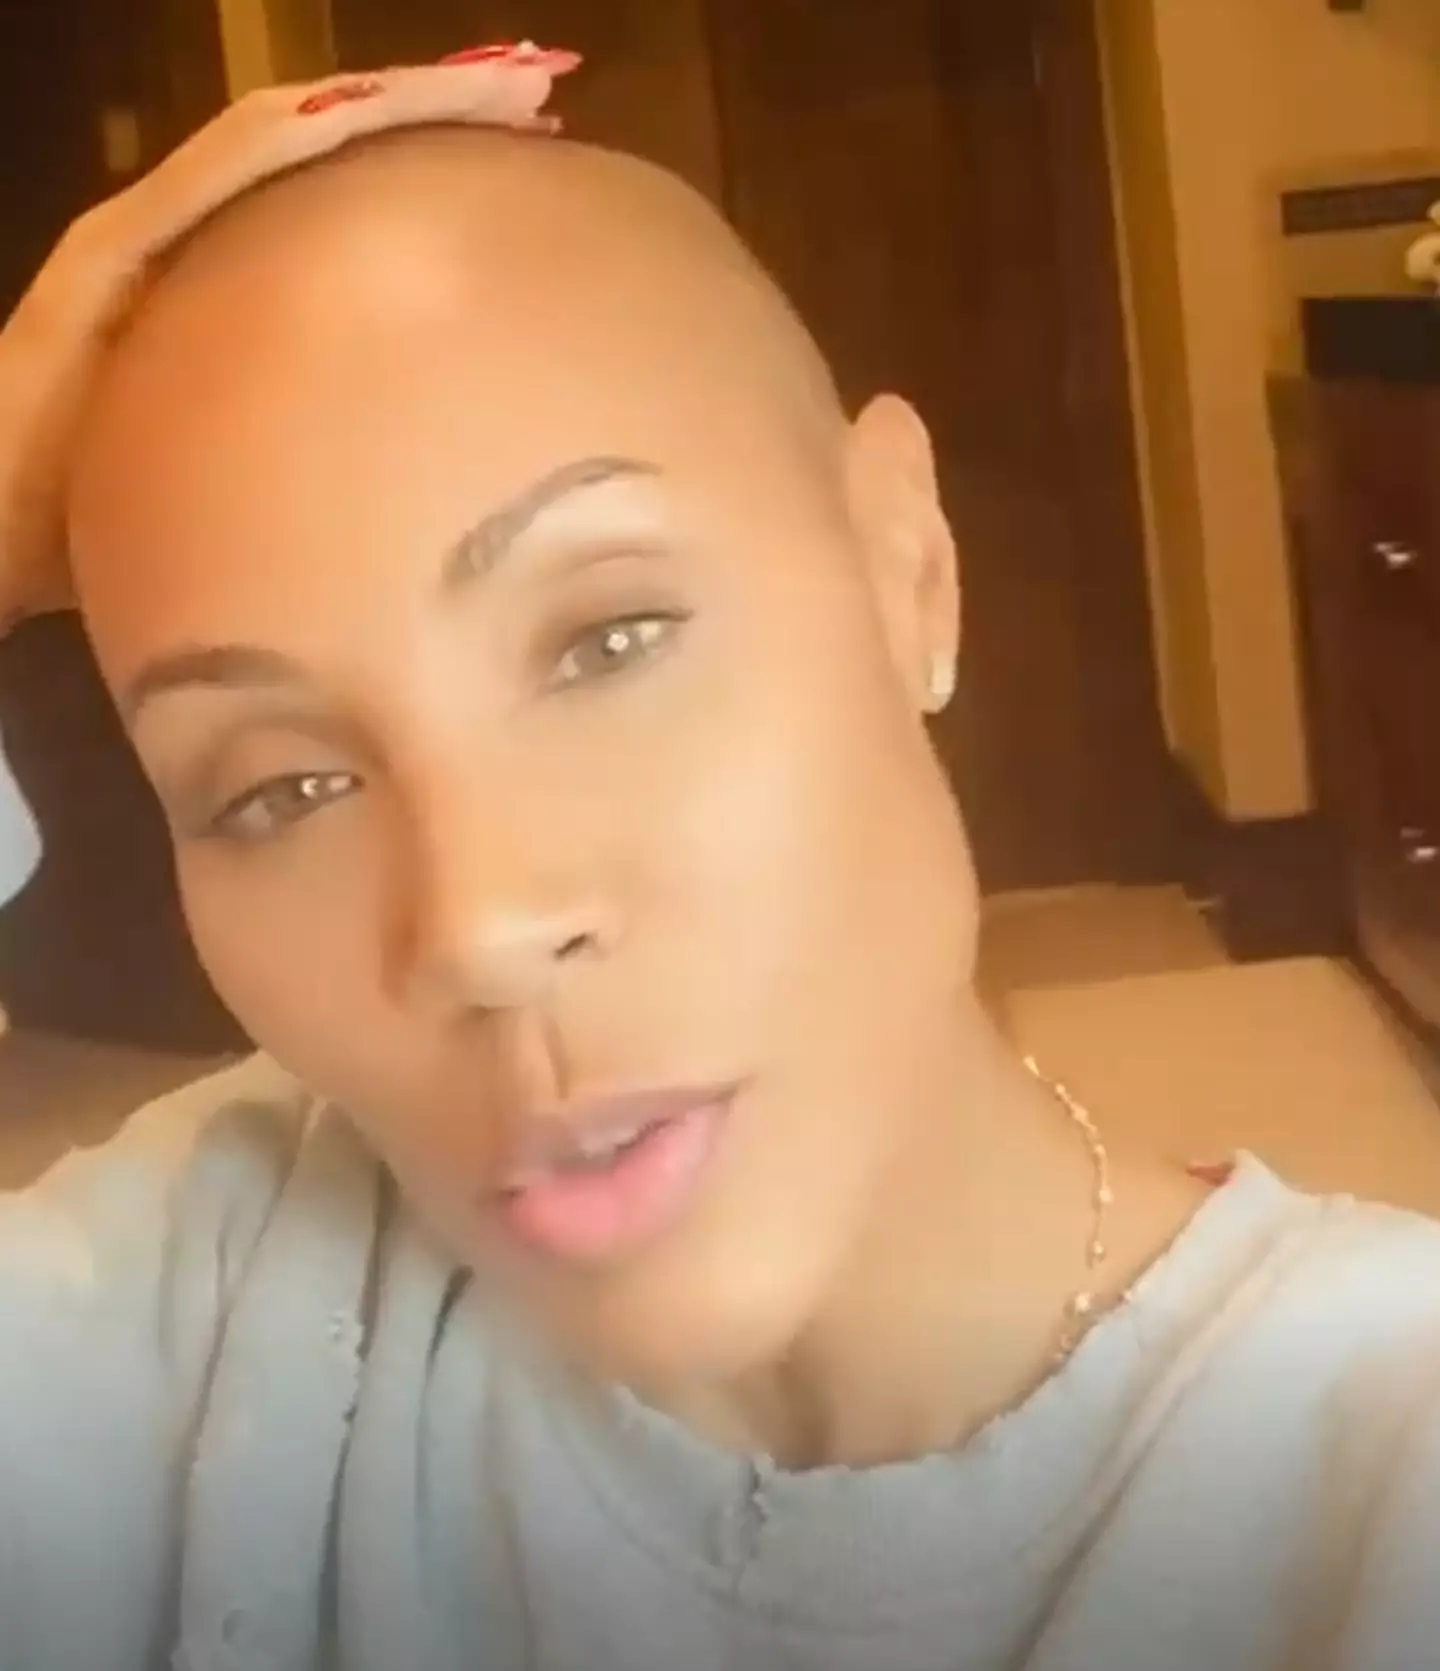 Pinkett Smith has been open about her alopecia.